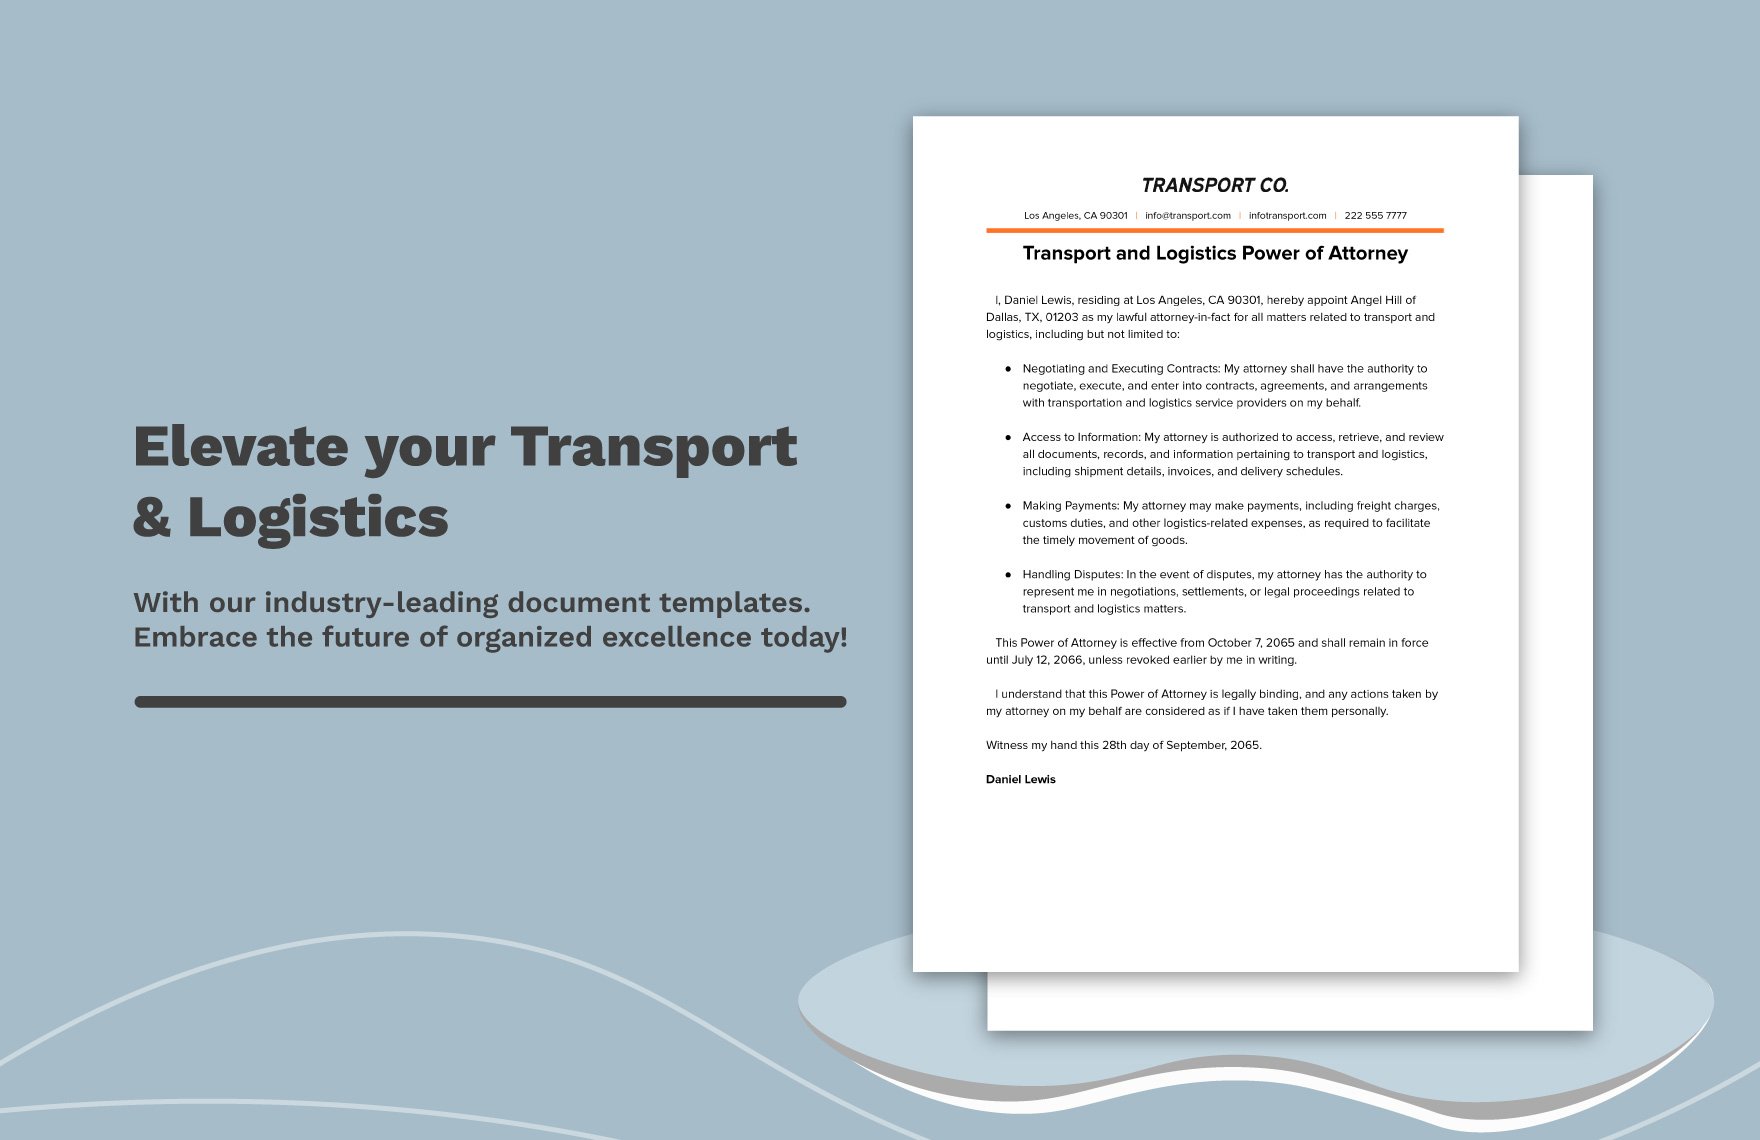 Transport and Logistics Power of Attorney Template